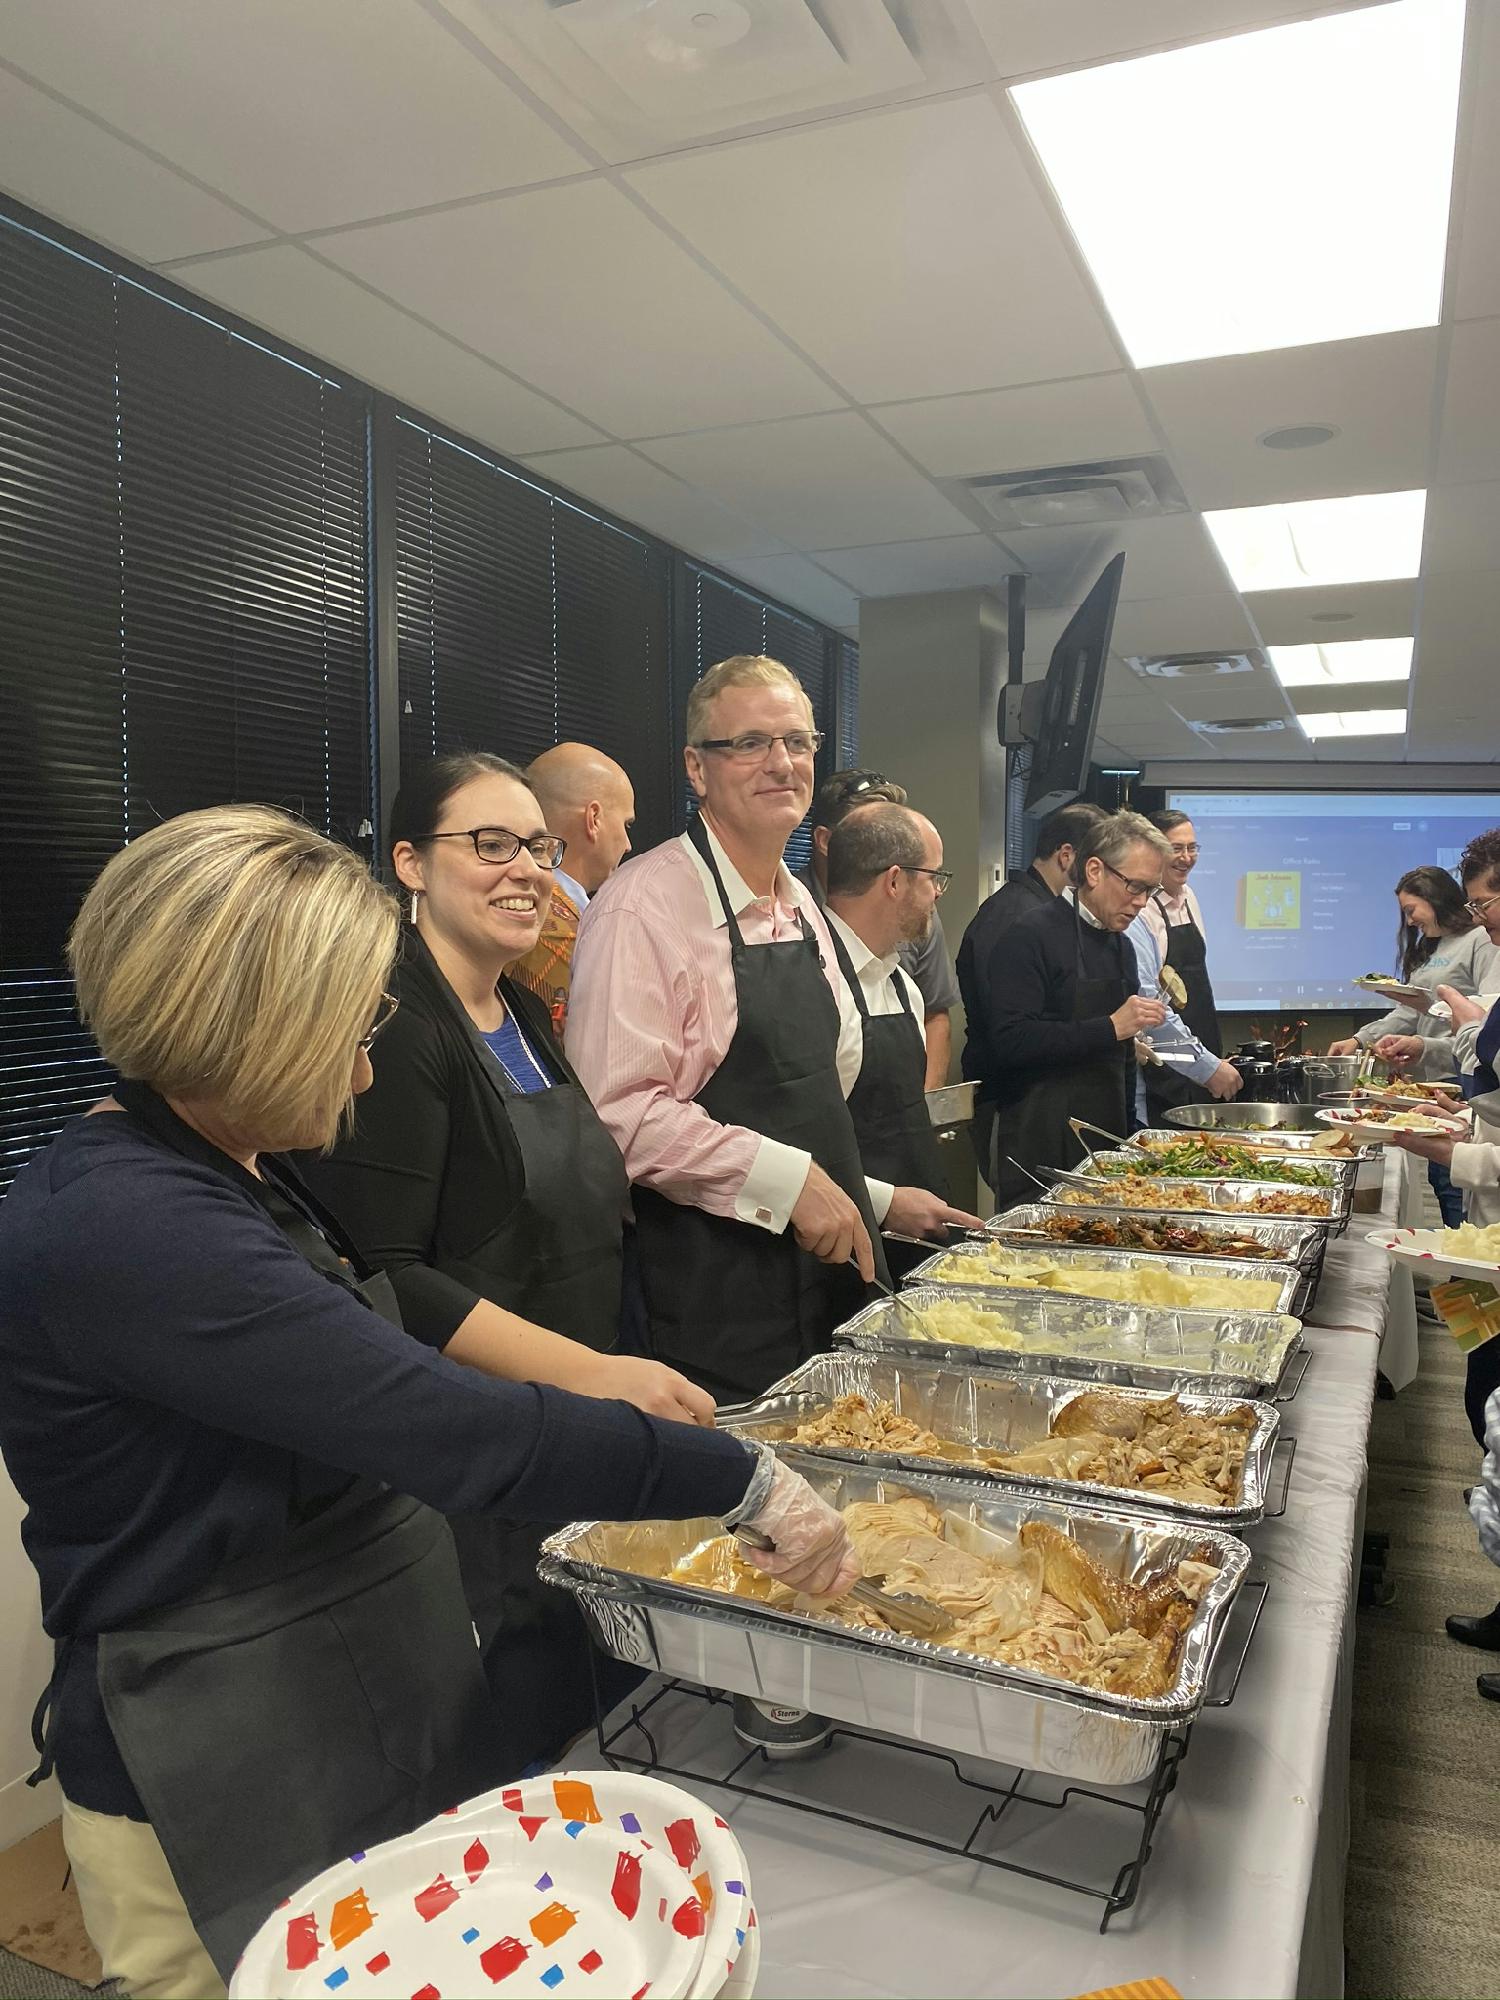 Our executive team serves employees a Fall Feast.